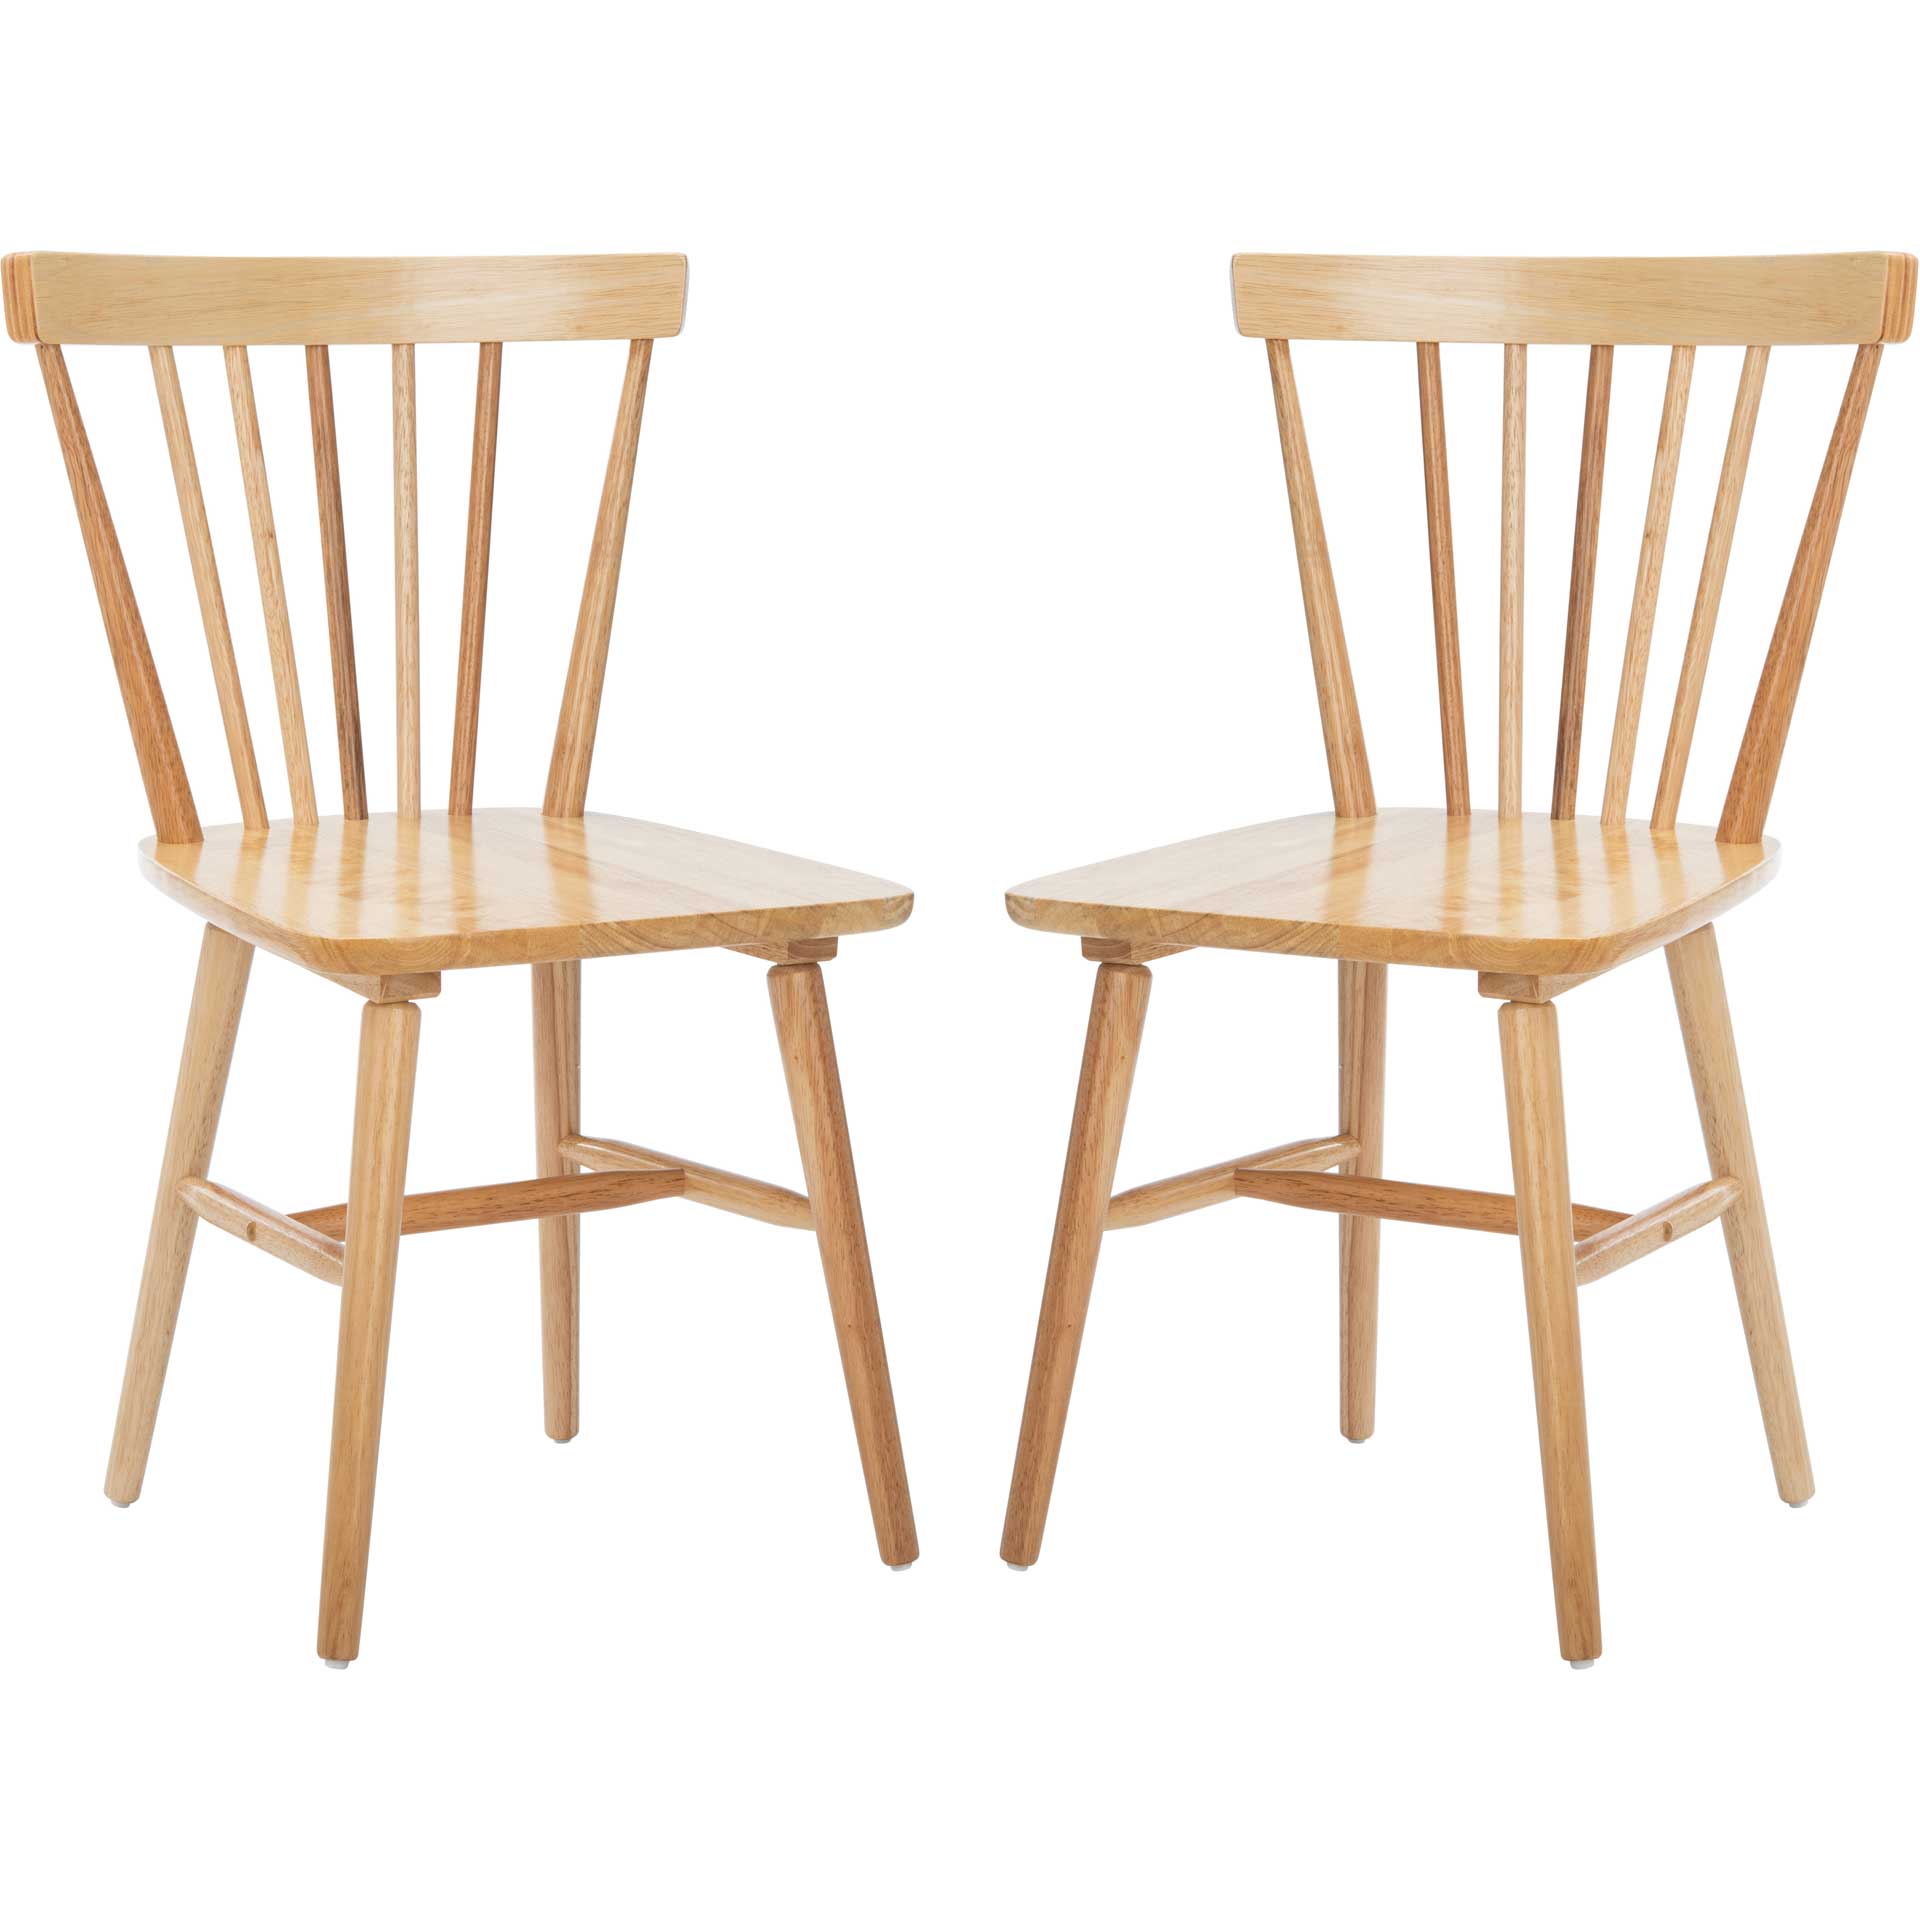 Wilder Spindle Back Dining Chair Natural (Set of 2)